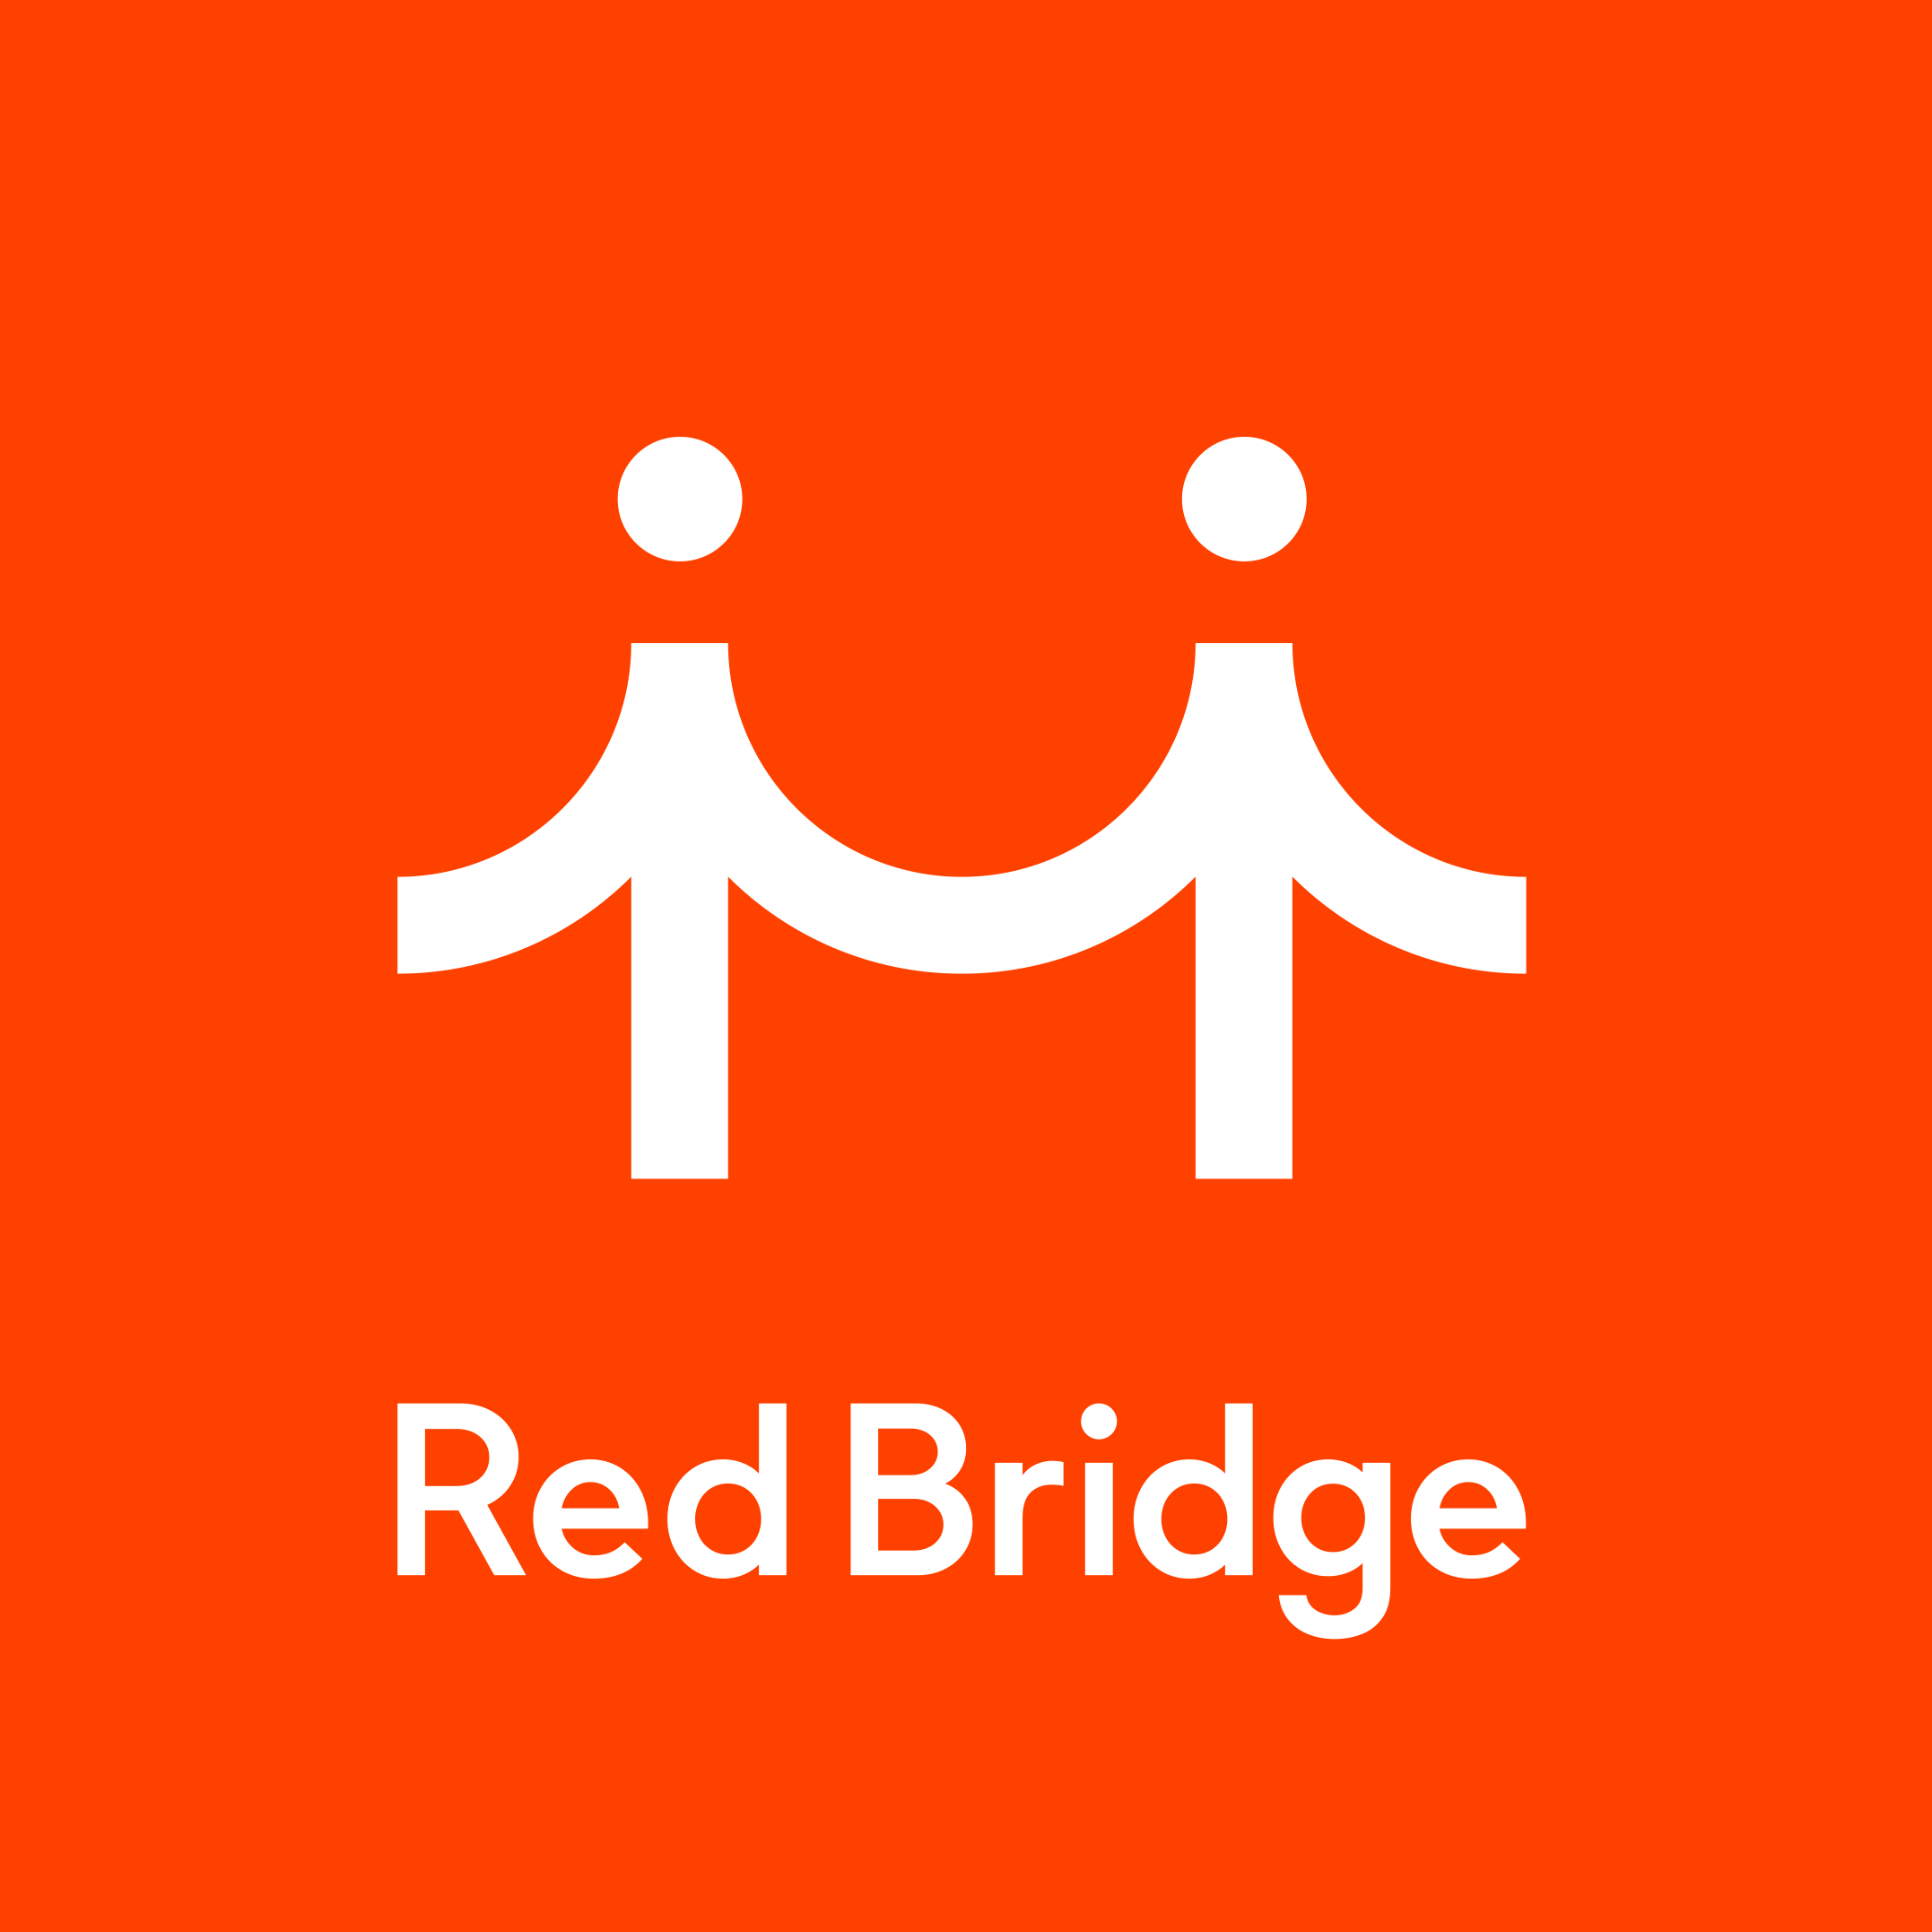 Red Bridge is a school that teaches students to set goals, work together, reflect and own their learning. Apply now:

https://t.co/p3leE8HmCC